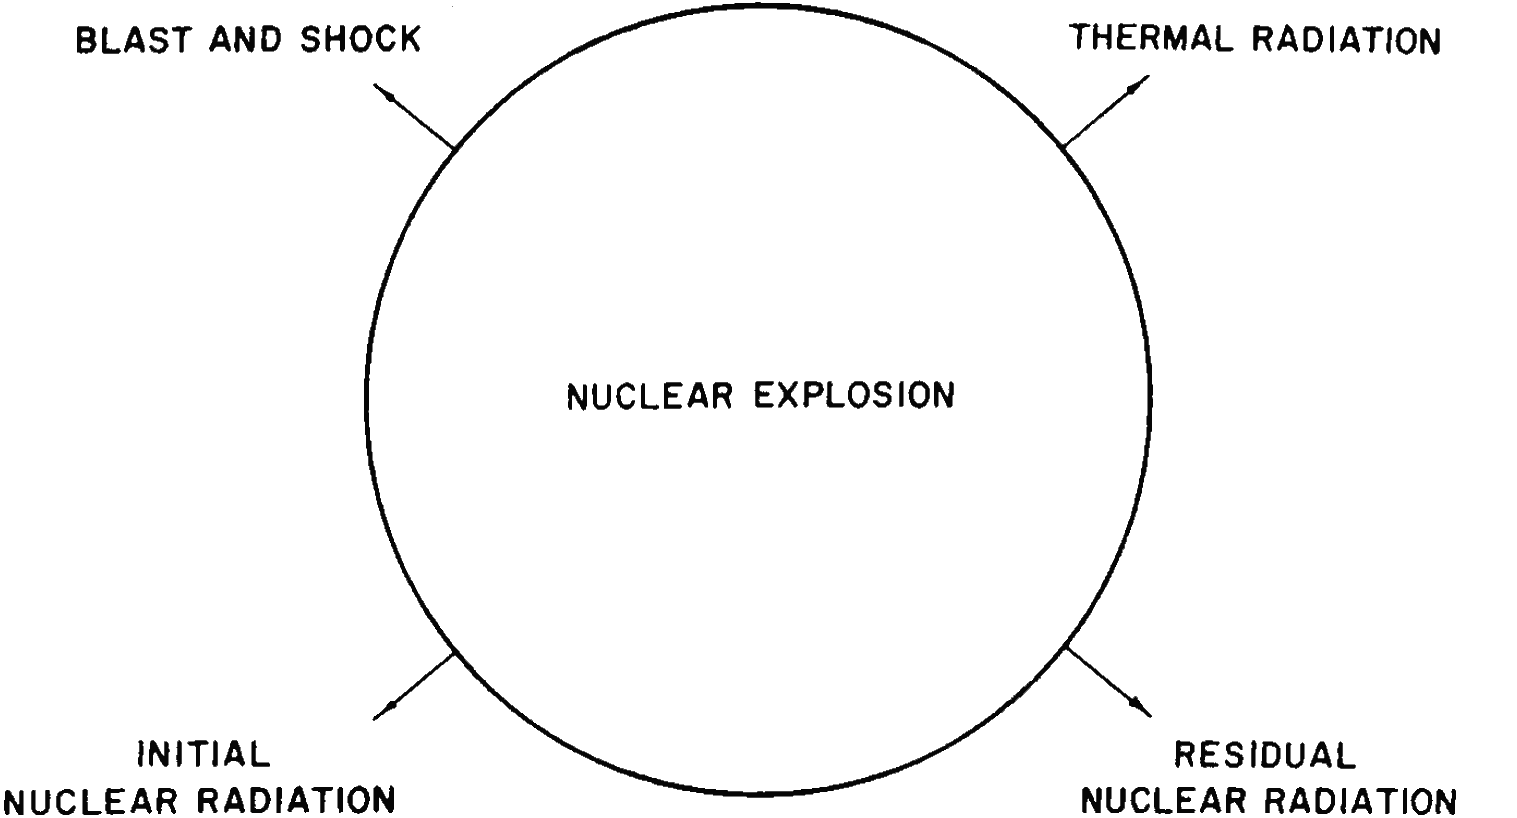 A conceptual diagram showing a large circle with four very thin arrows radiating from the circle, one pointing to each corner of the figure. The center of the circle is the label “nuclear explosion.” Starting from the top left and proceeding clockwise, the arrows are labeled: Blast and shock, thermal radiation, residual nuclear radiation, and initial nuclear radiation.